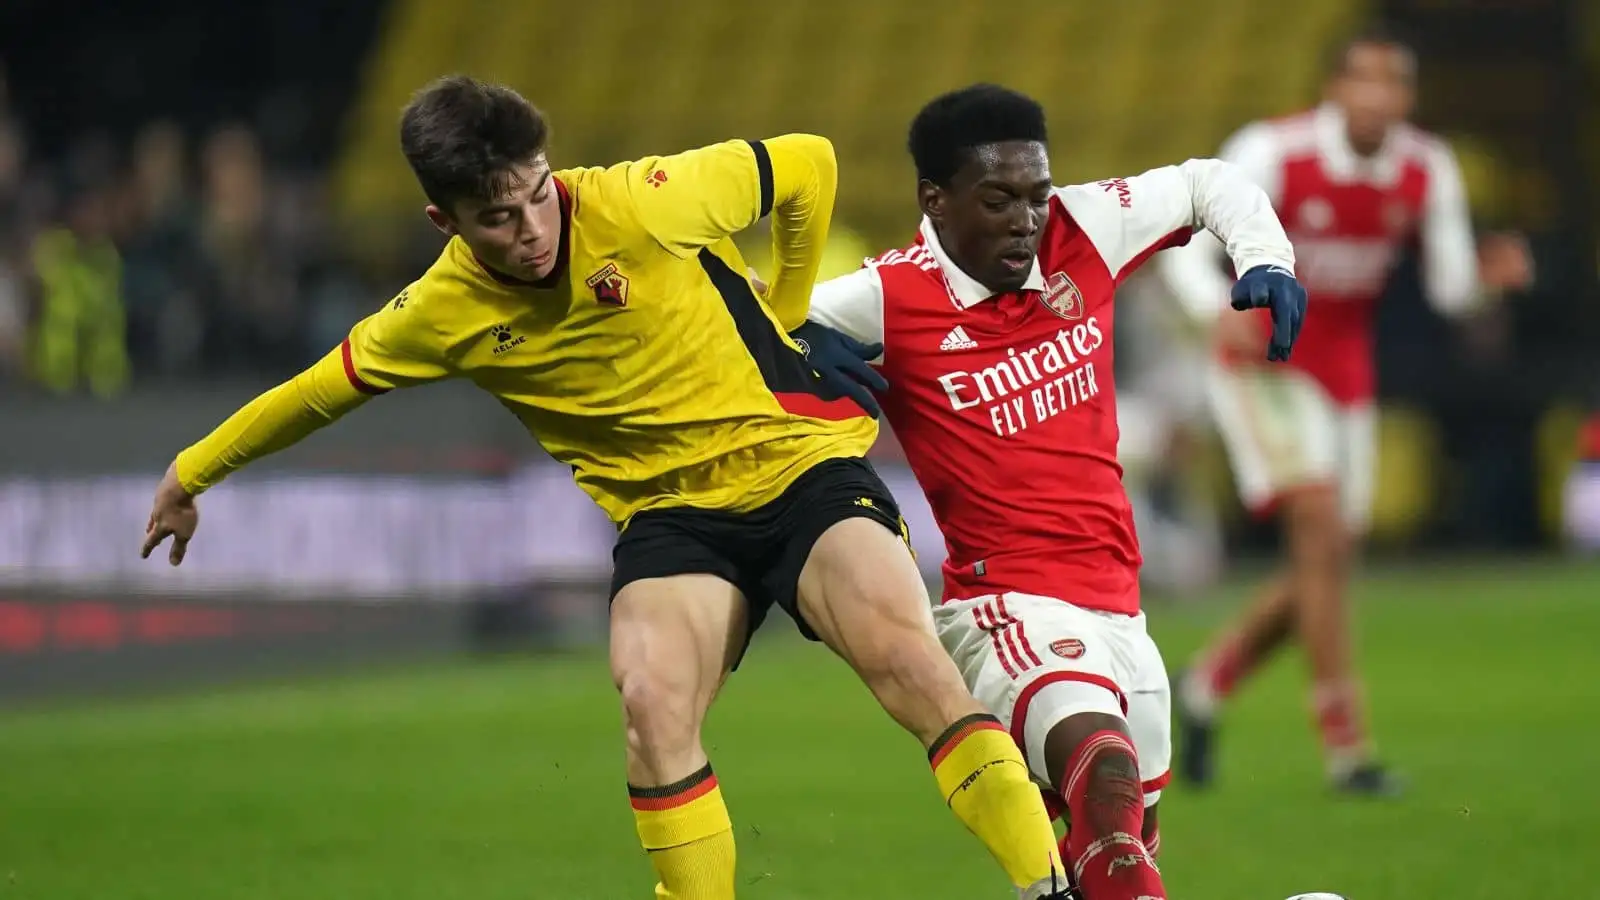 Watford's Harry Amass and Arsenal's Amario Cozier-Duberry (right) battle for the ball during The FA Youth Cup fifth round match at Vicarage Road, Watford